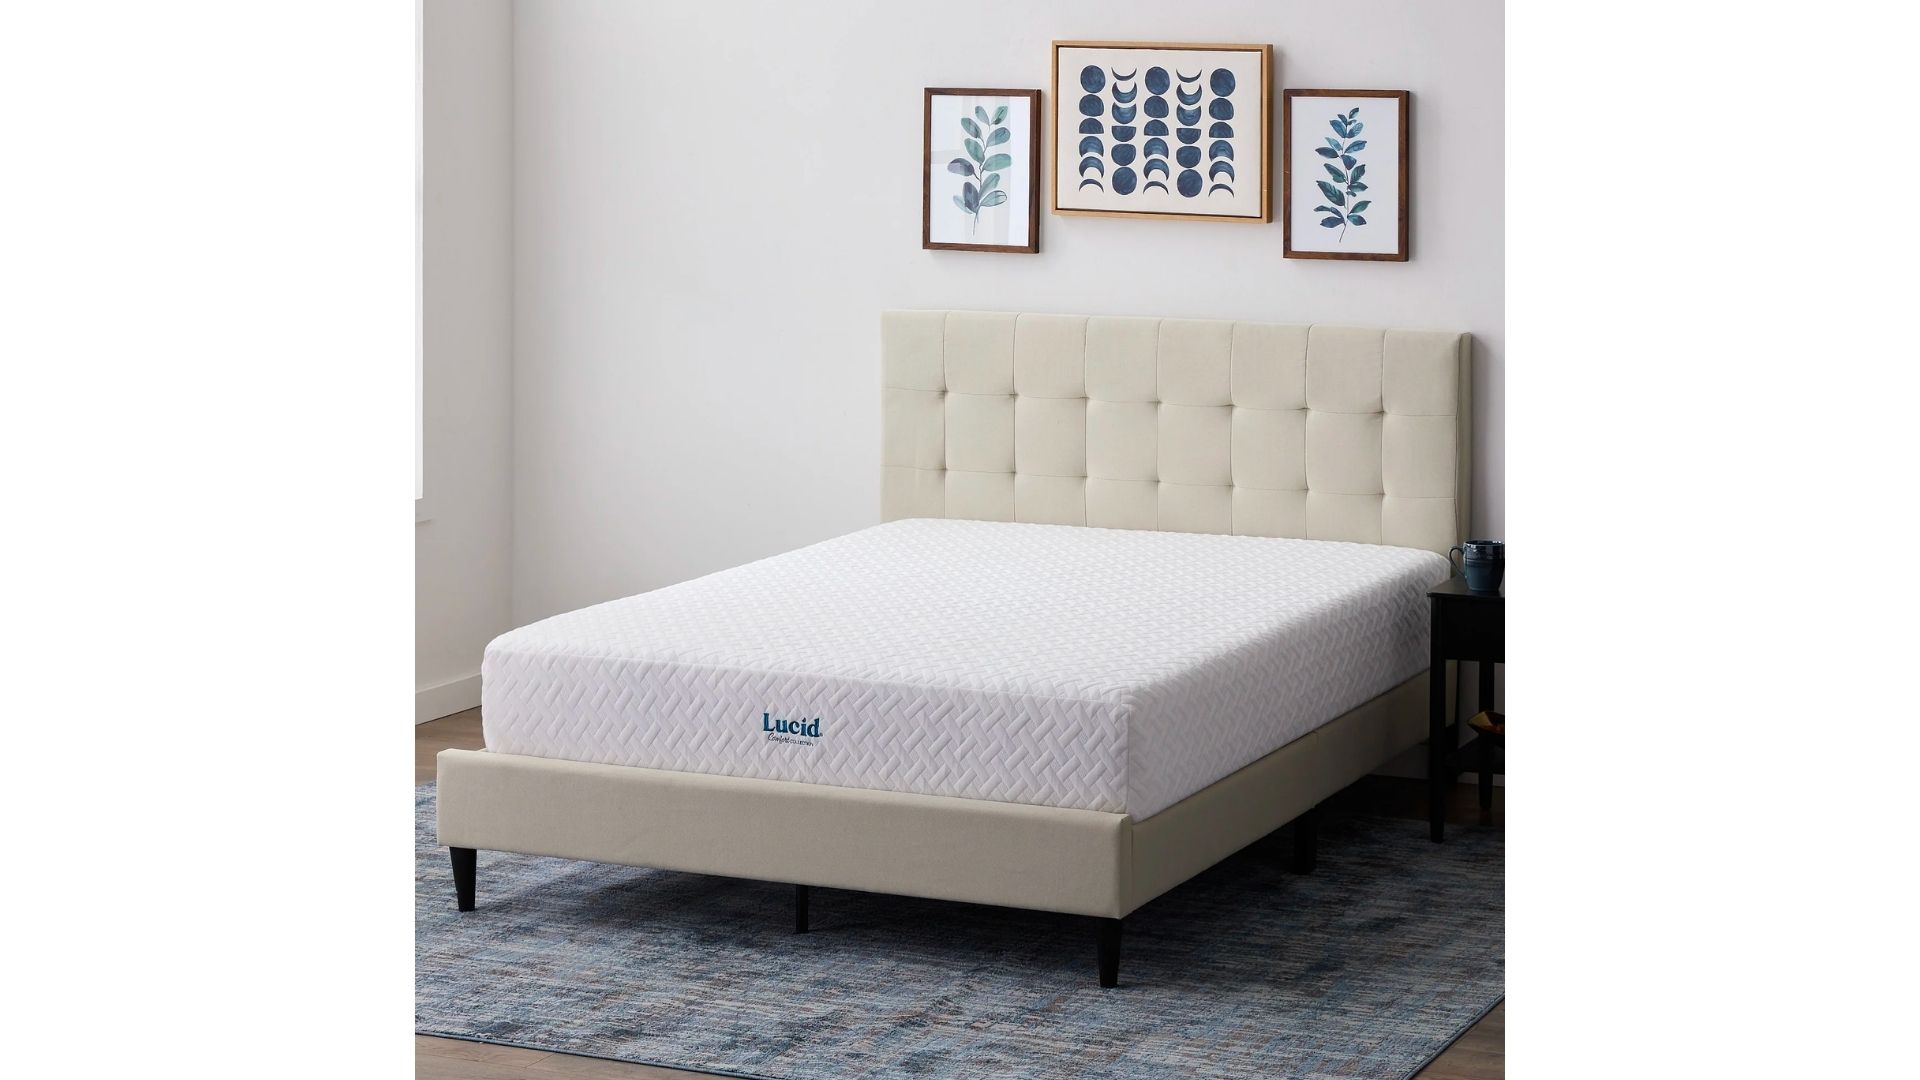 Best mattresses for hot flash and menopause